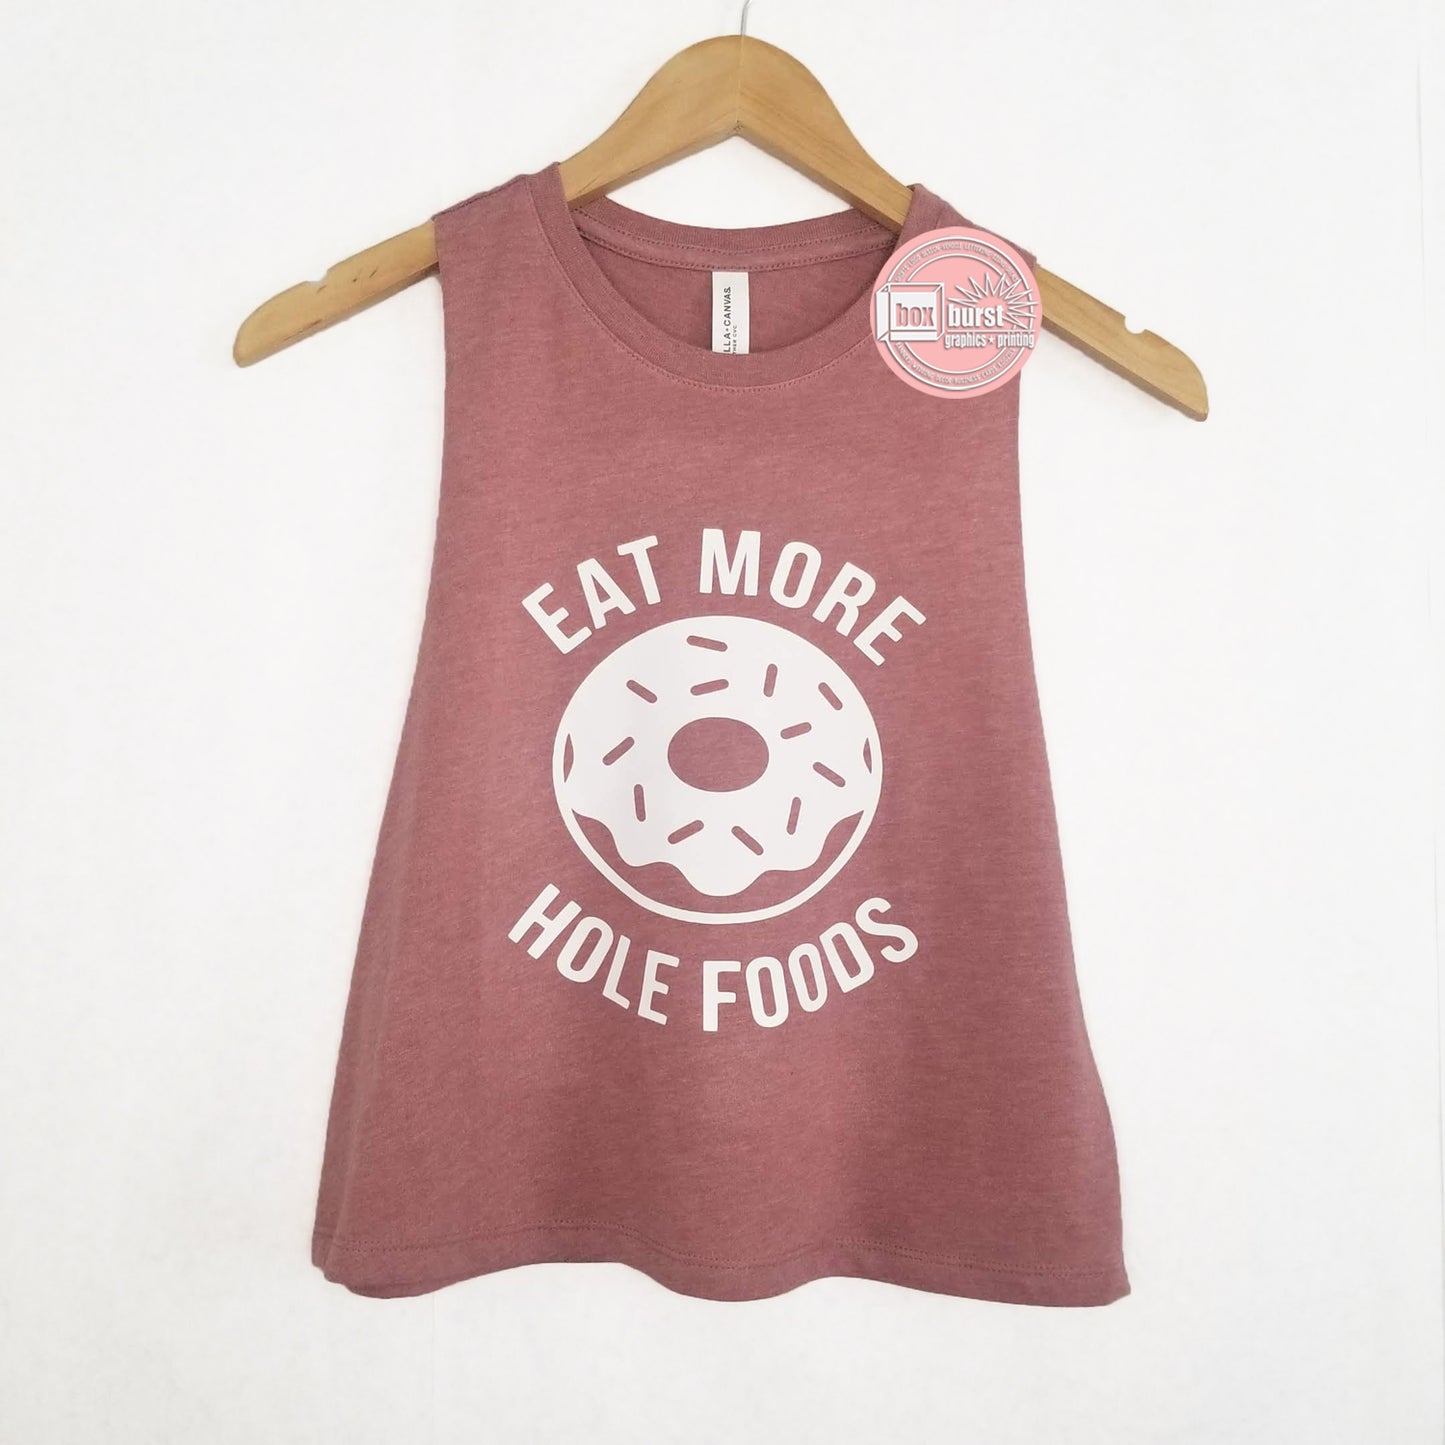 Eat more hole foods crop muscle tank